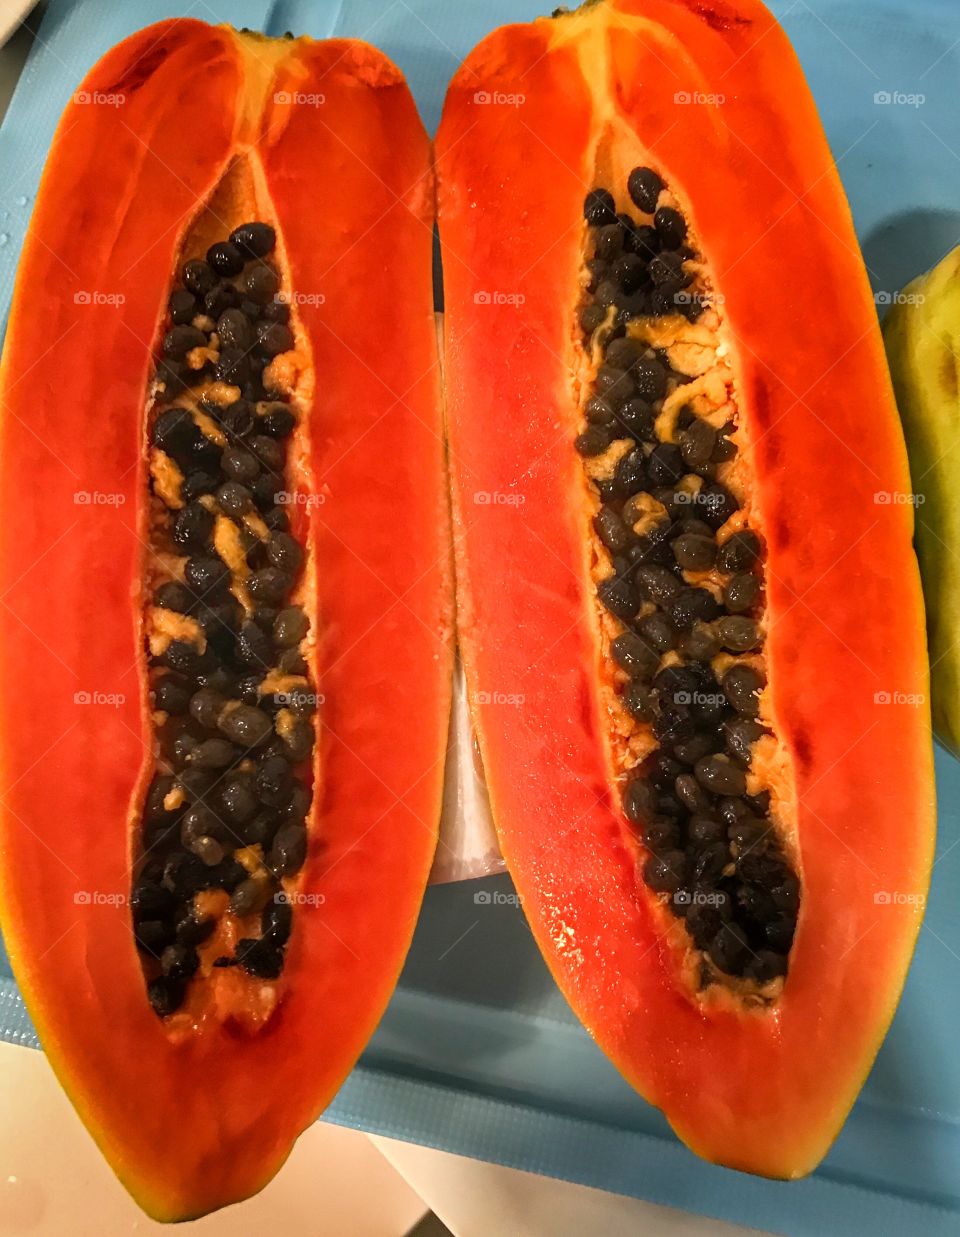 Papaya - brilliant color, yummy fruit... Southeast Asia delicacy, very flavorful 